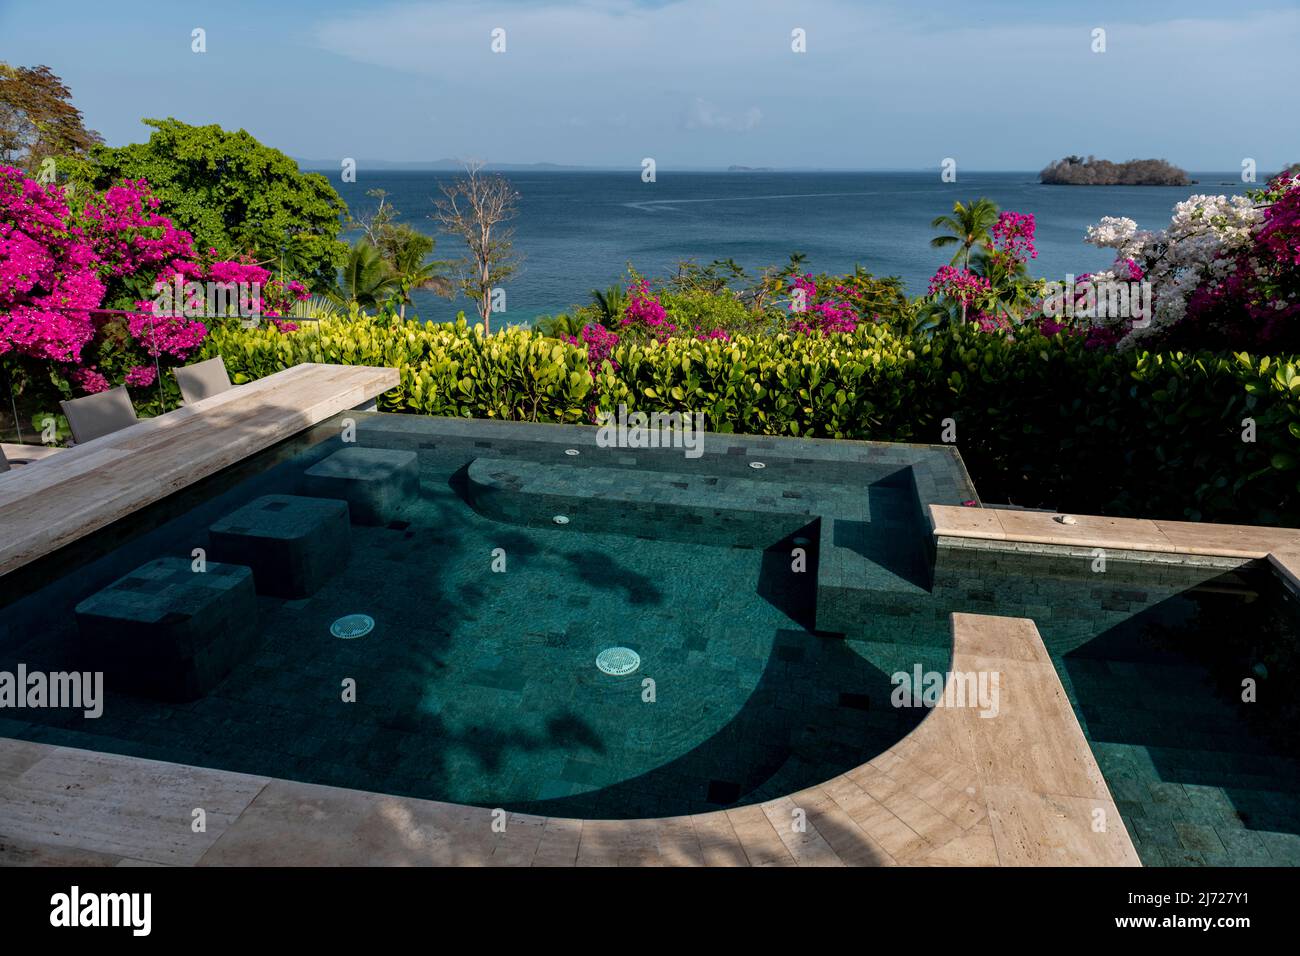 Villa in the tropics on the ocean pacific coast with an Infinity pool and view out to sea, Panama, Central America Stock Photo